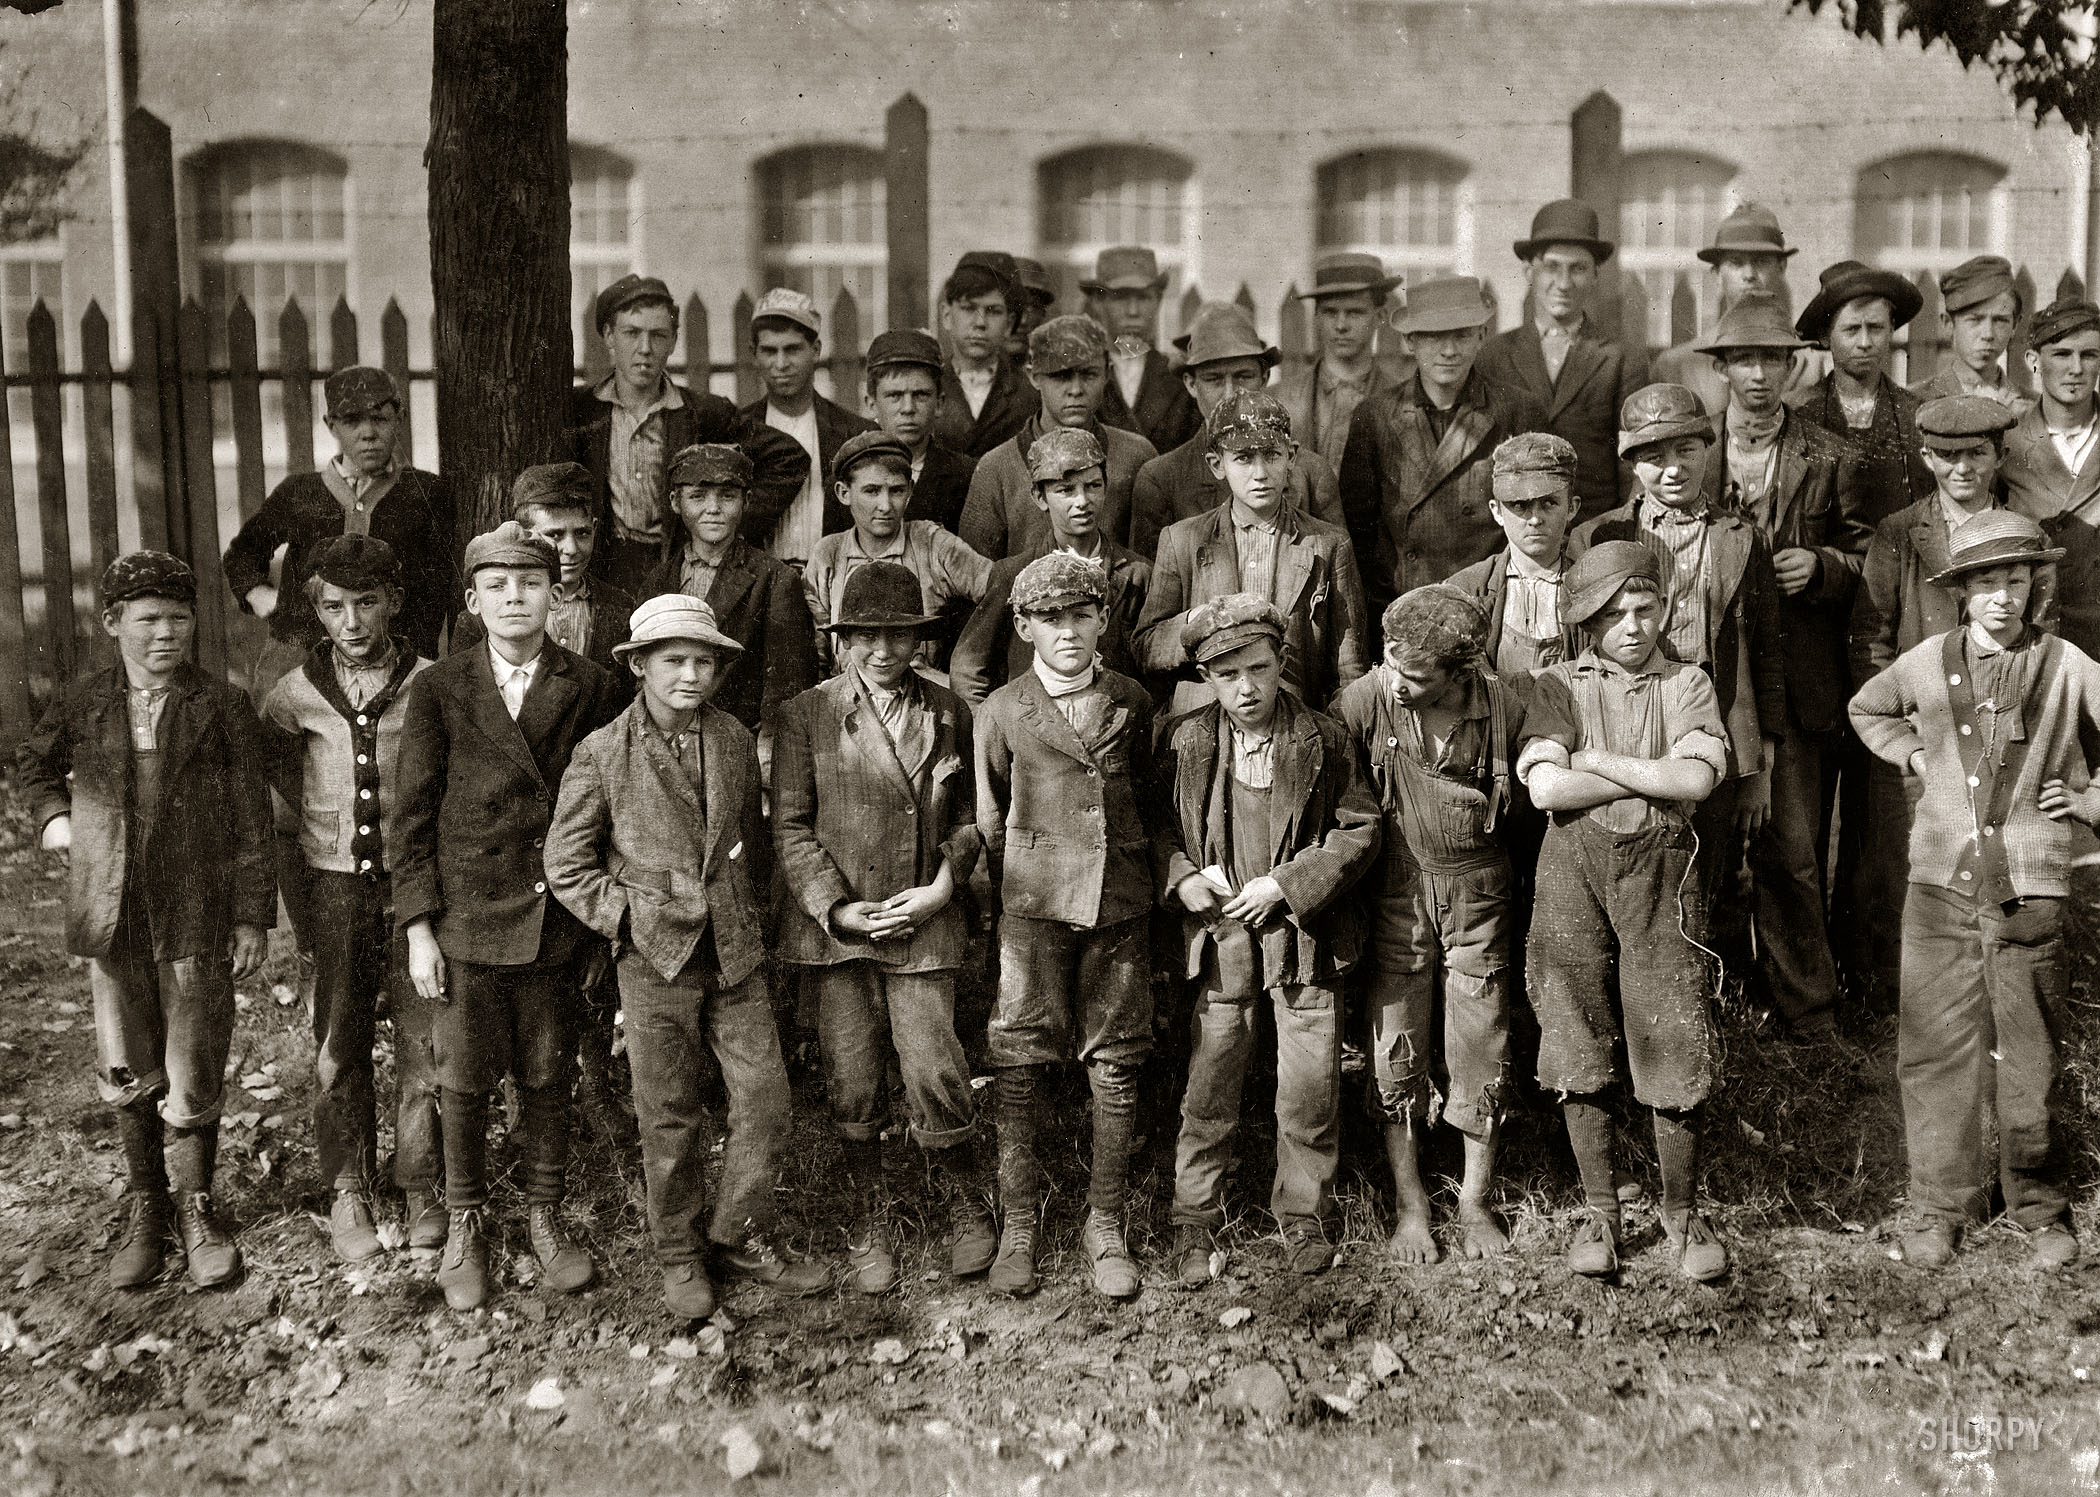 November 1910. Huntsville, Alabama. "Closing hour, Saturday noon, at Dallas Mill. Every child in photo, so far as I was able to ascertain, works in that mill. When I questioned some of the youngest boys as to their ages, they said they were 12, and then other boys said they were lying. (Which sentiment I agreed with.)" Photograph and caption by Lewis Wickes Hine. View full size.